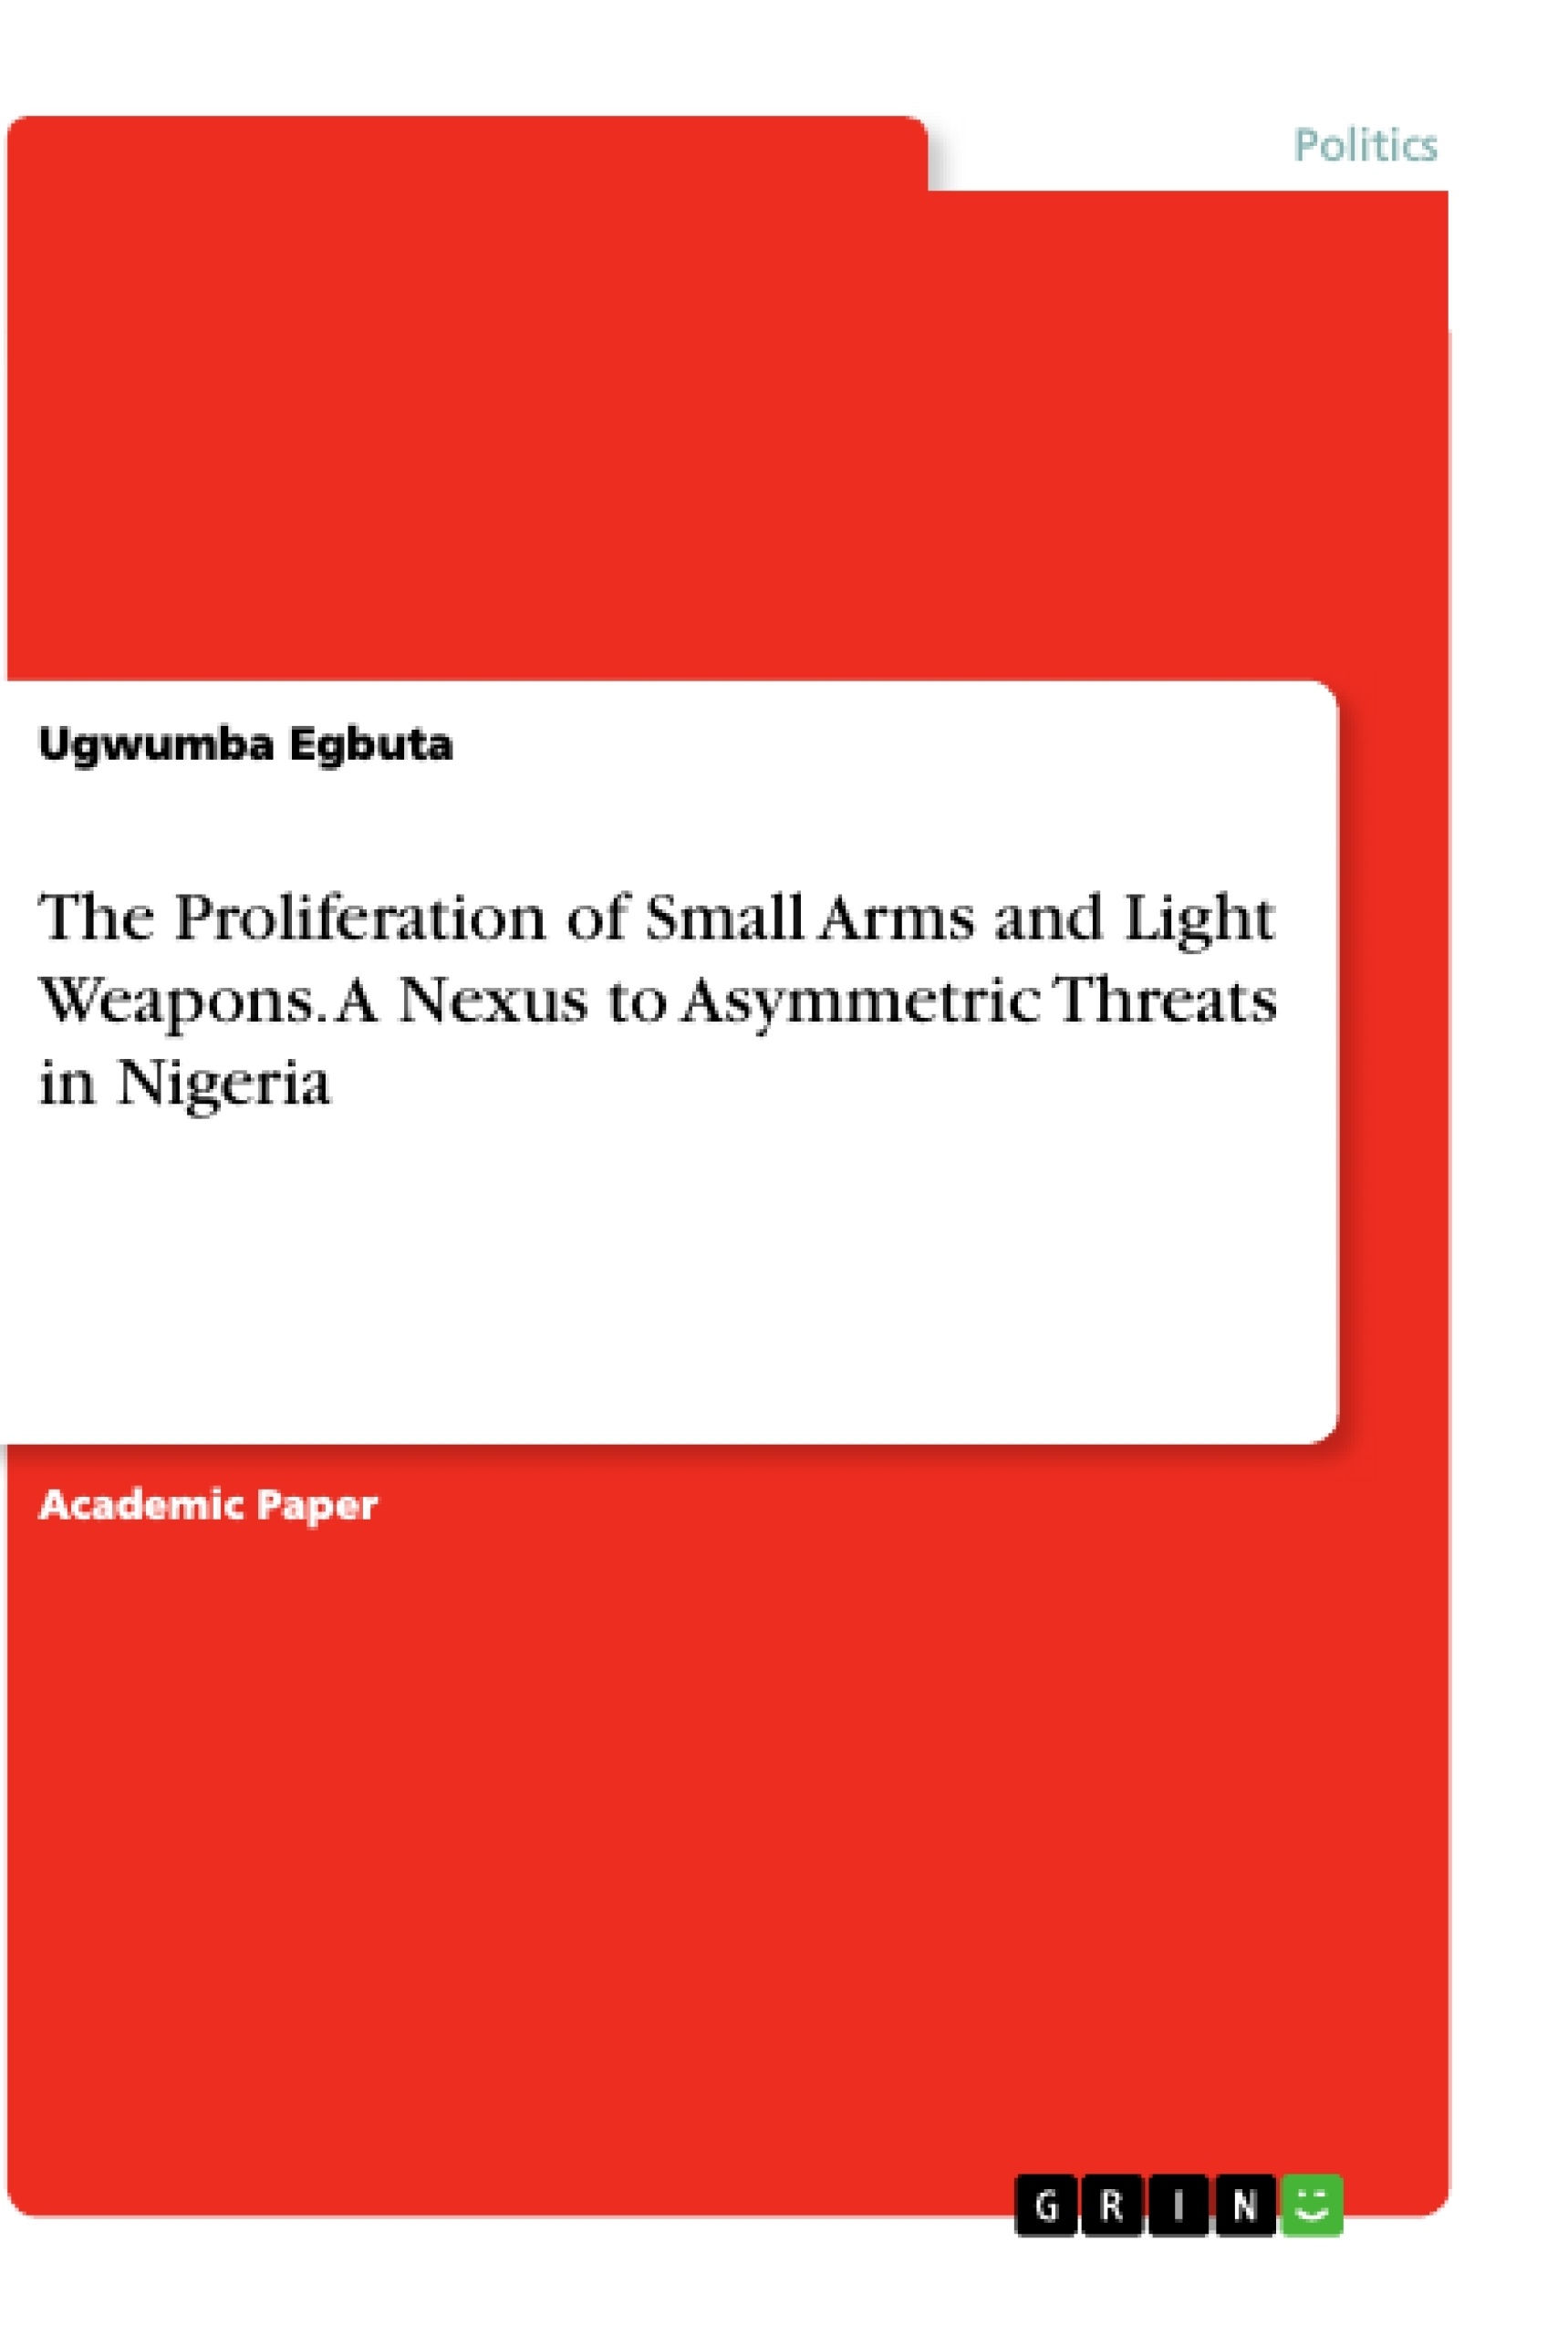 Título: The Proliferation of Small Arms and Light Weapons. A Nexus to Asymmetric Threats in Nigeria